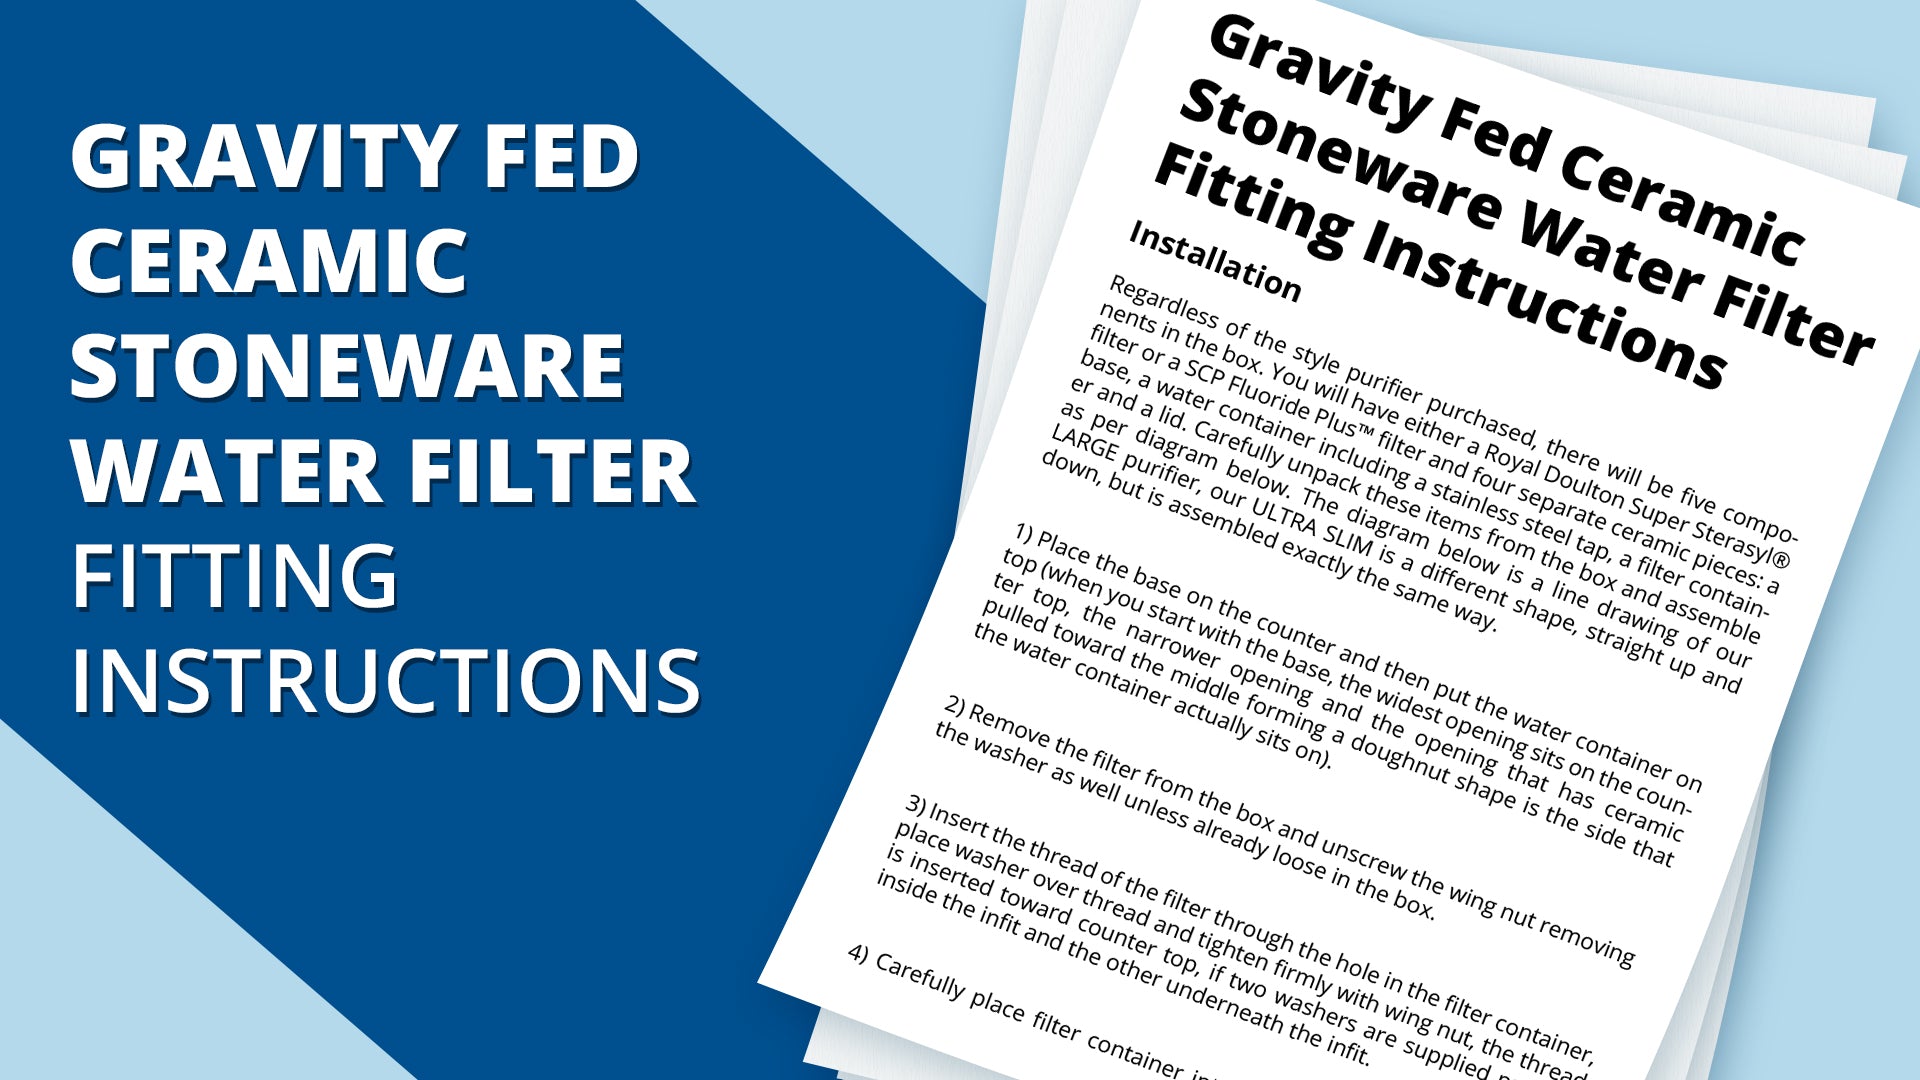 Gravity Fed Ceramic Stoneware Water Filter Fitting Instructions